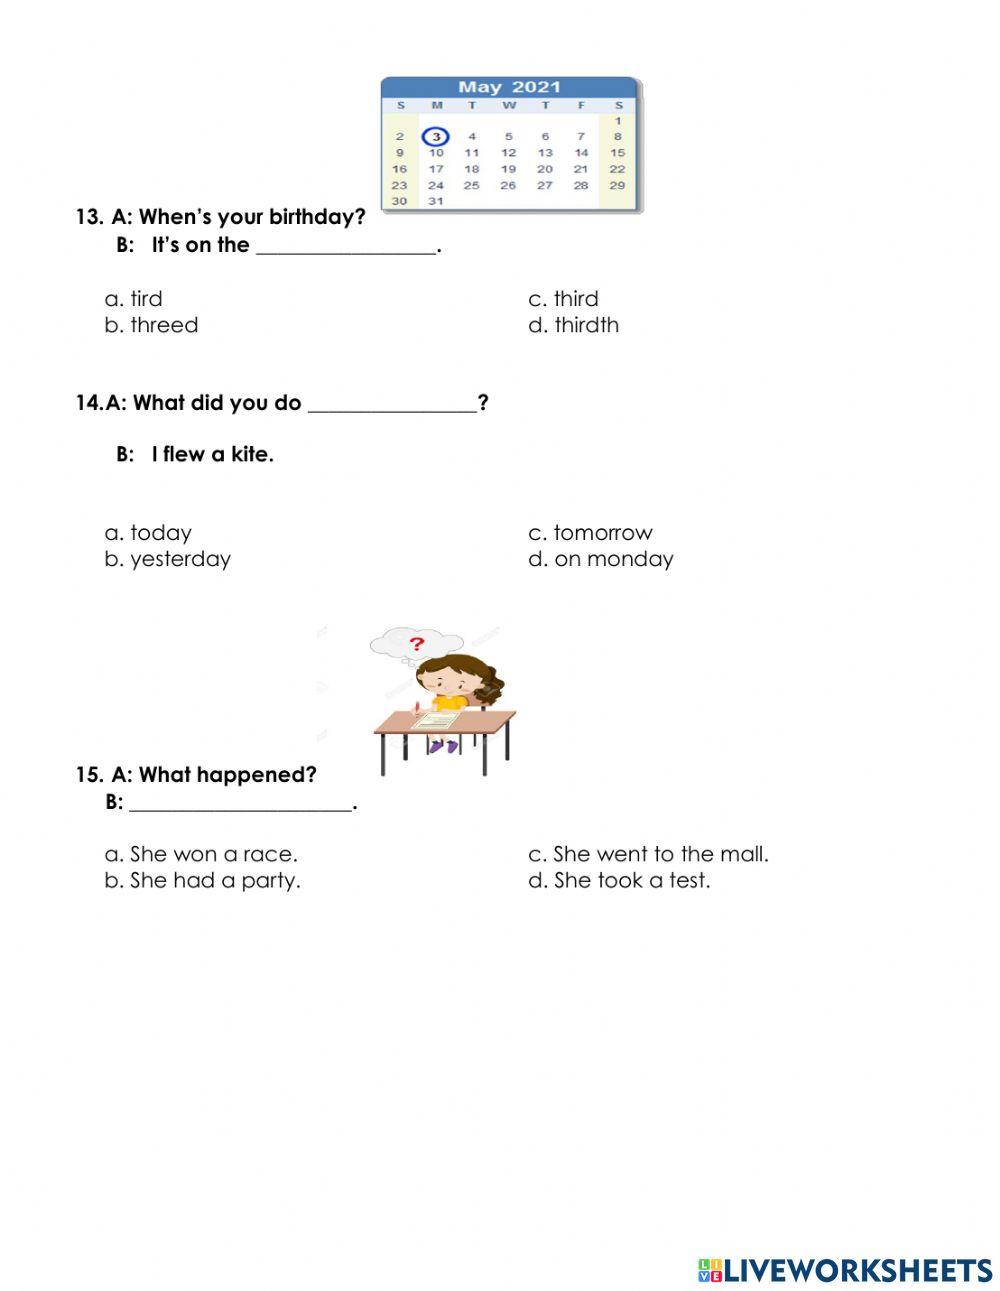 P4 english final test for term 1